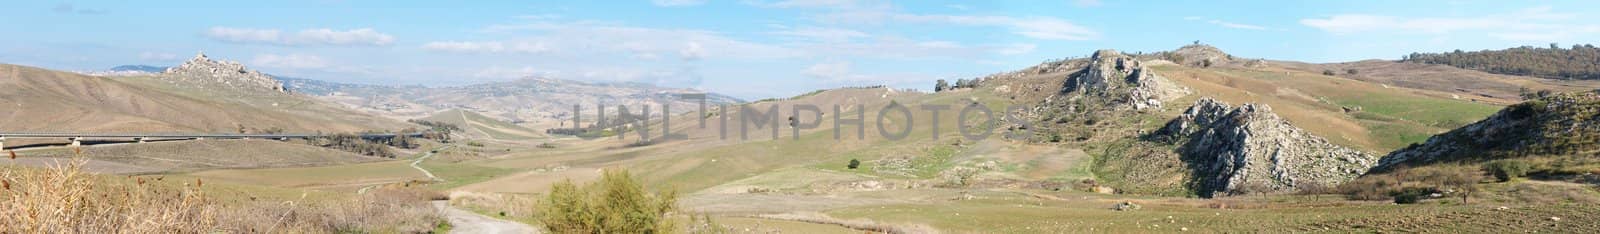 Rural landscape in central Sicily, Italy, in the morning by slavapolo